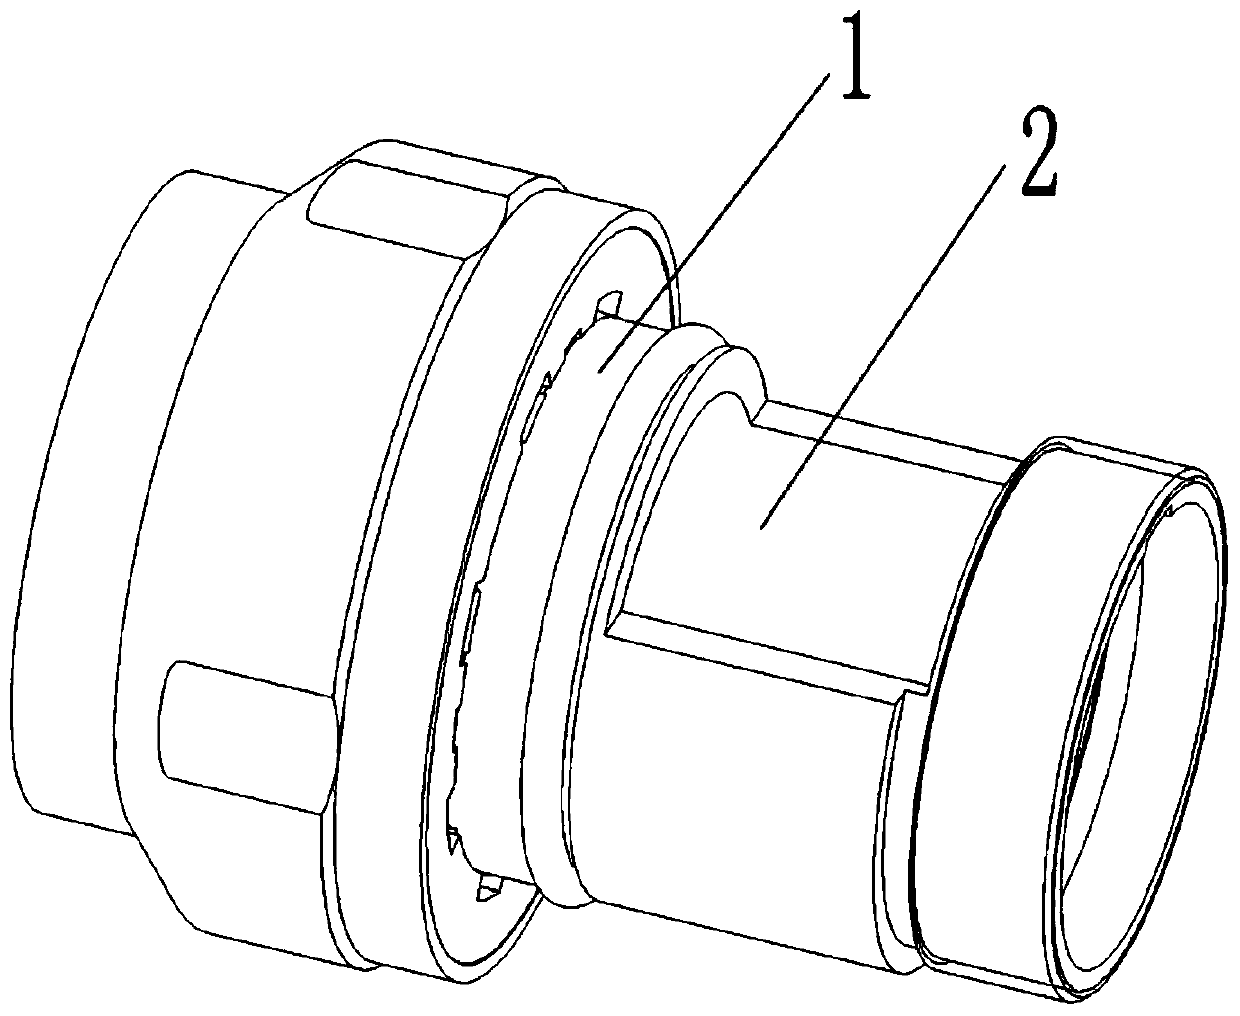 Field wiring connector